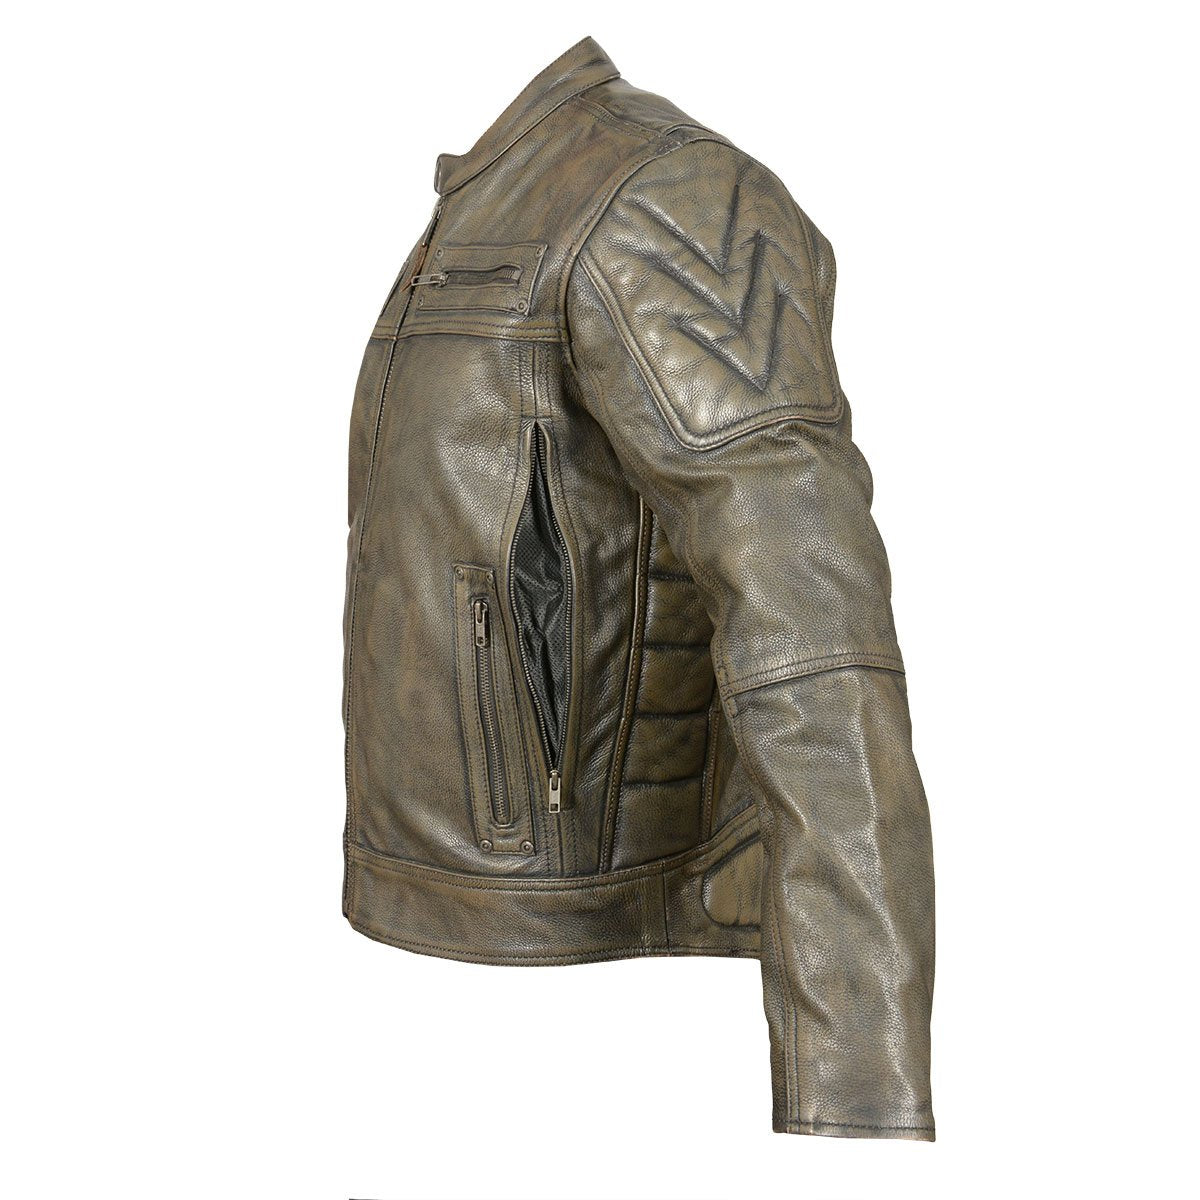 Vance Leather High Mileage Men's Distressed Brown Padded and Vented Leather Scooter Jacket